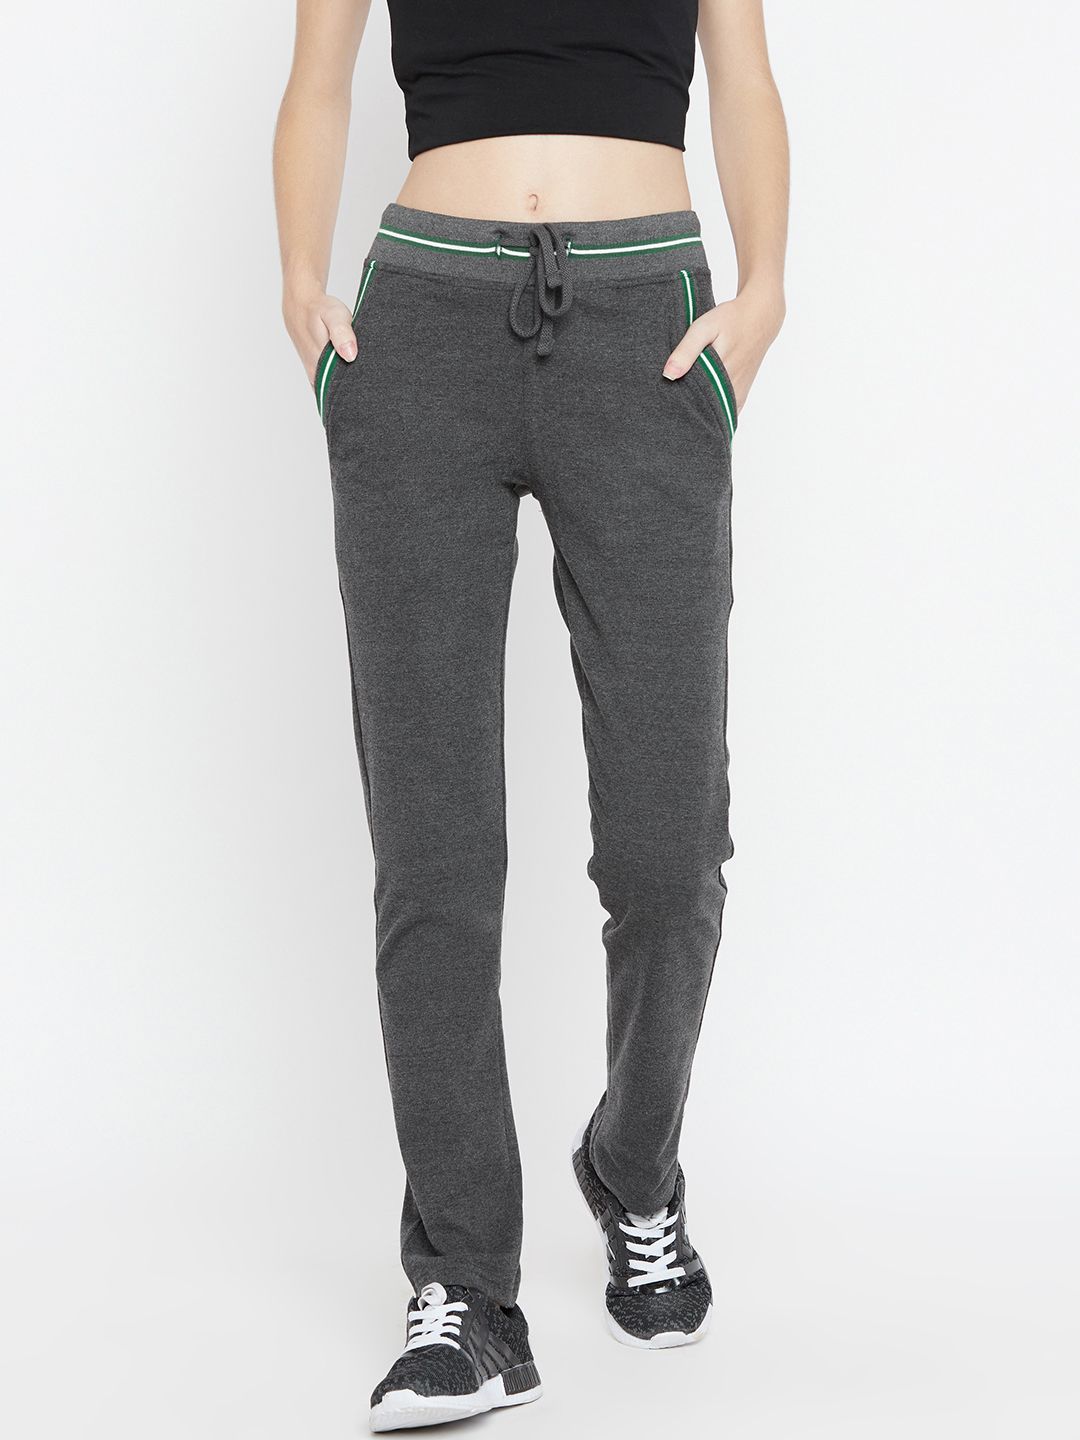 Cayman Women Charcoal Grey Solid Track Pants Price in India